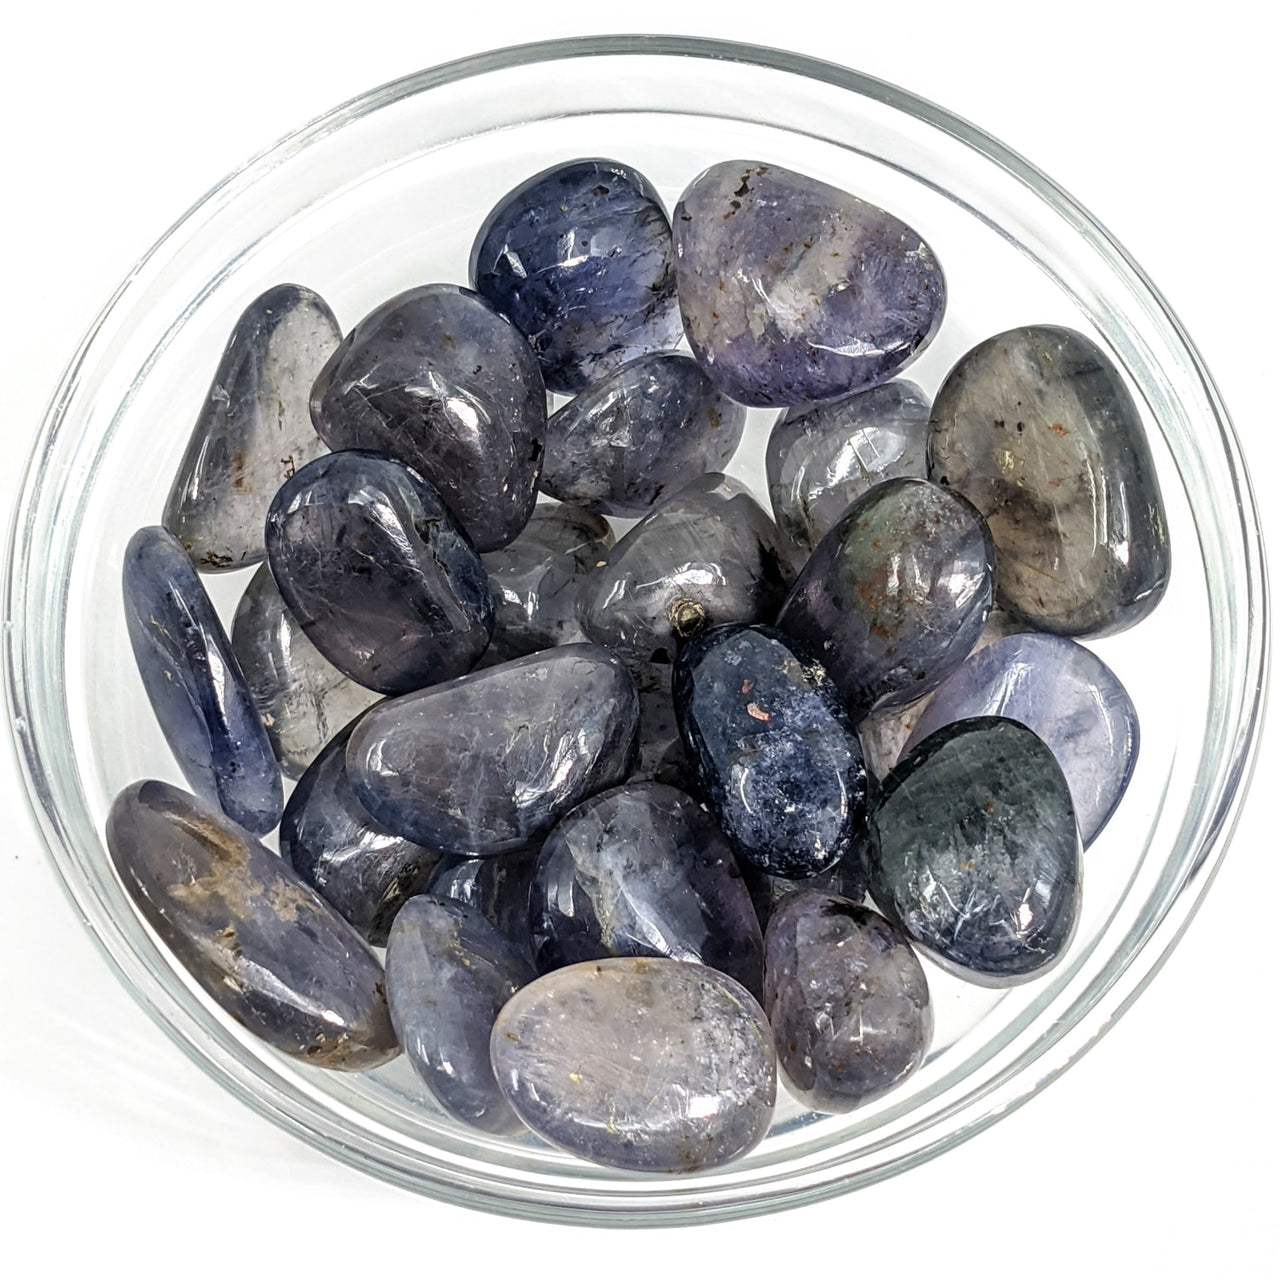 Iolite Translucent Tumble Stone Grade A #SK9125 in a bowl filled with blue and white crystals